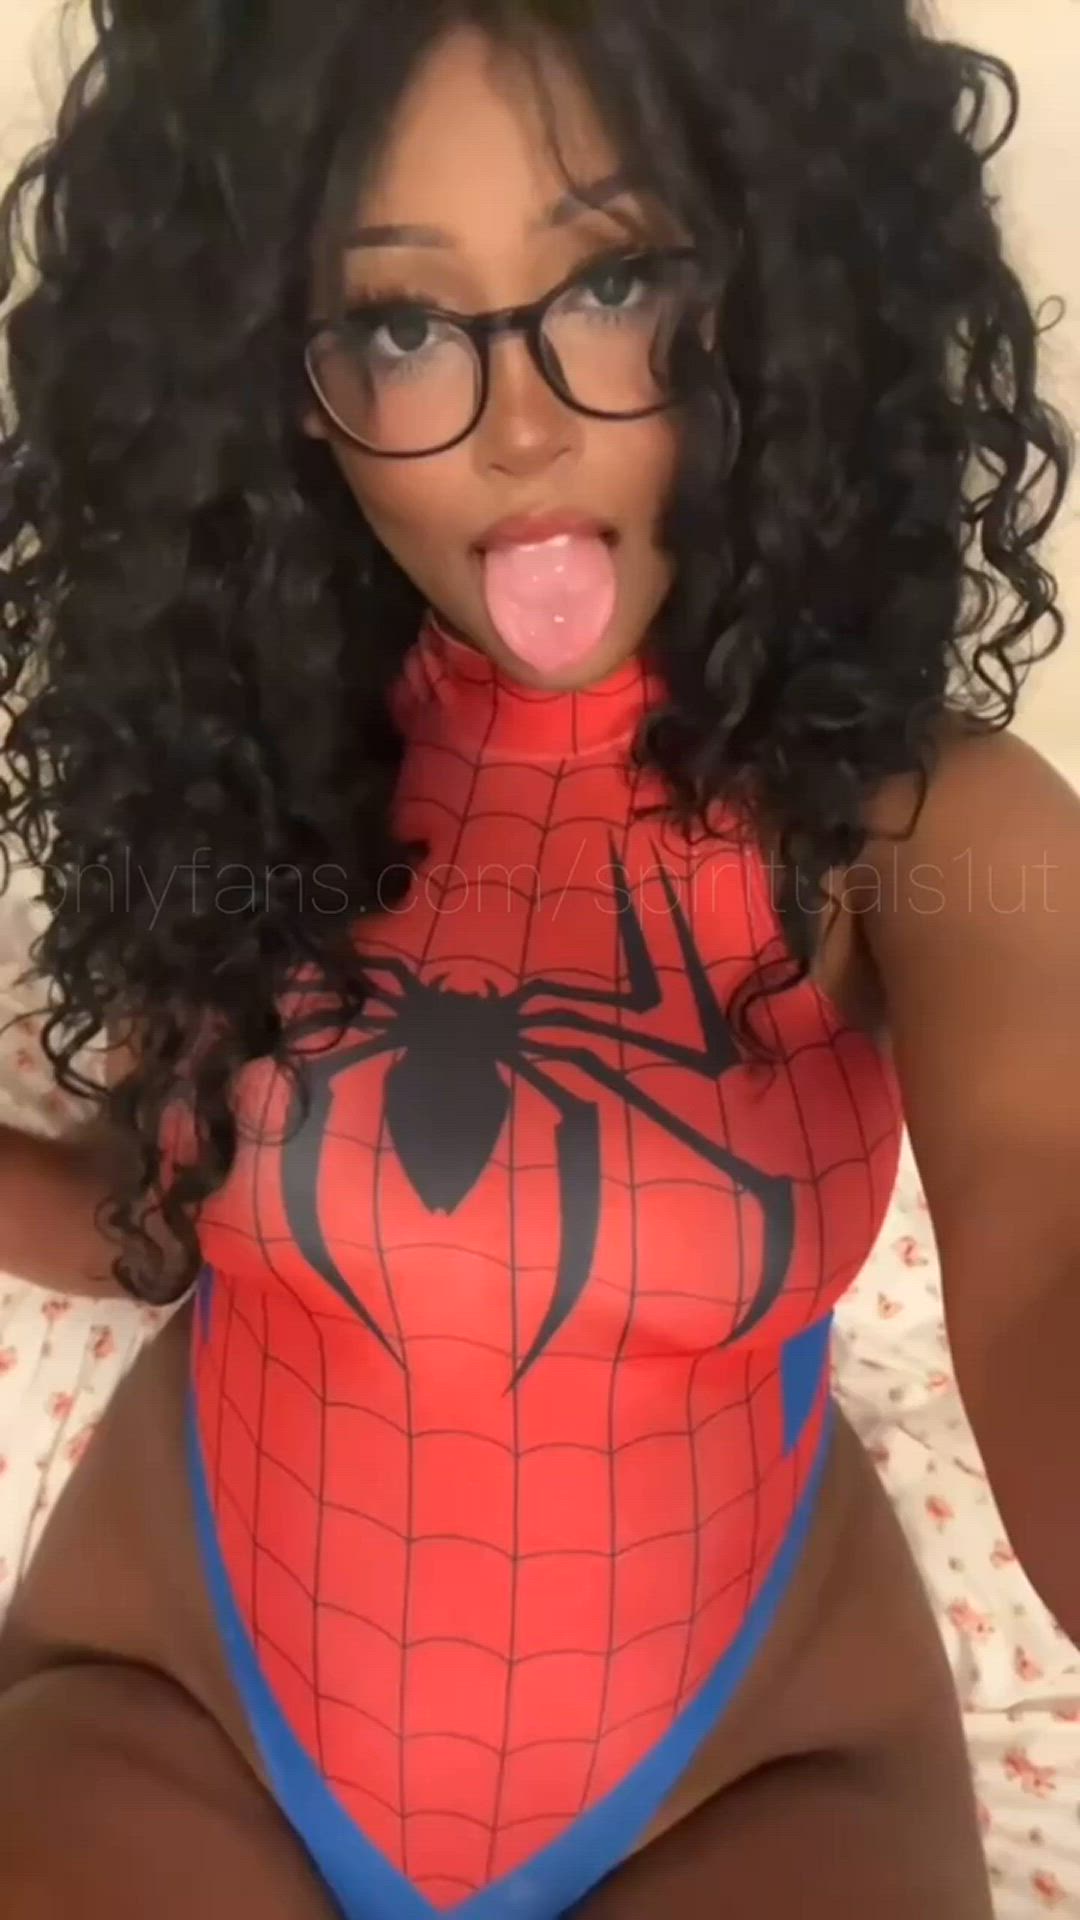 Ebony porn video with onlyfans model $5 ONLYFANS: SPIRITUALS1UT <strong>@spirituals1ut</strong>